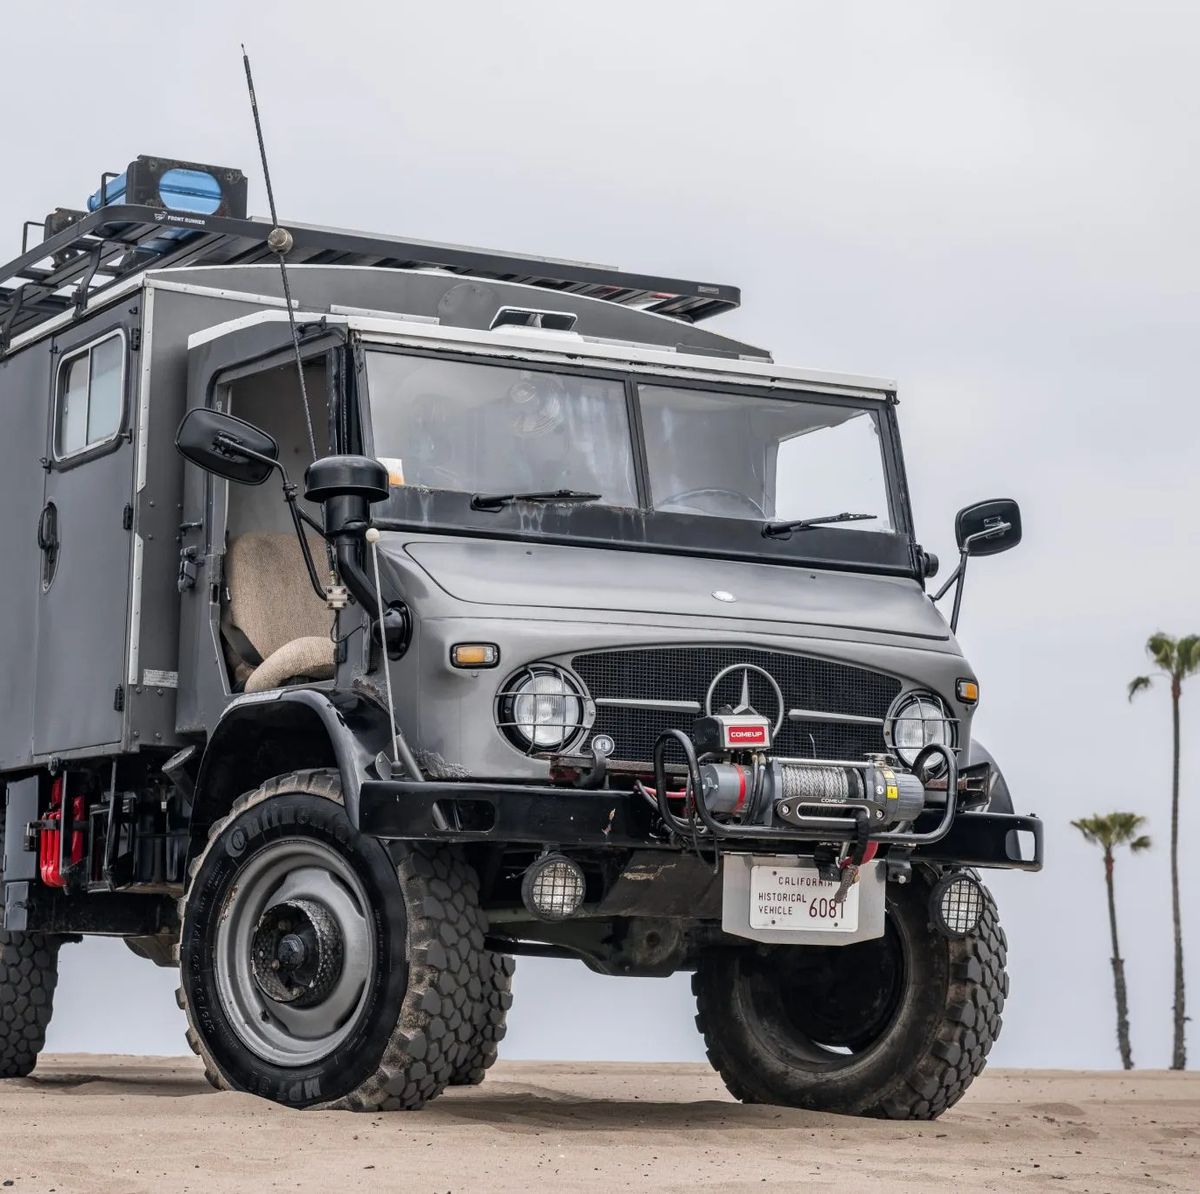 Buy This Unimog and Camp at the End of the World